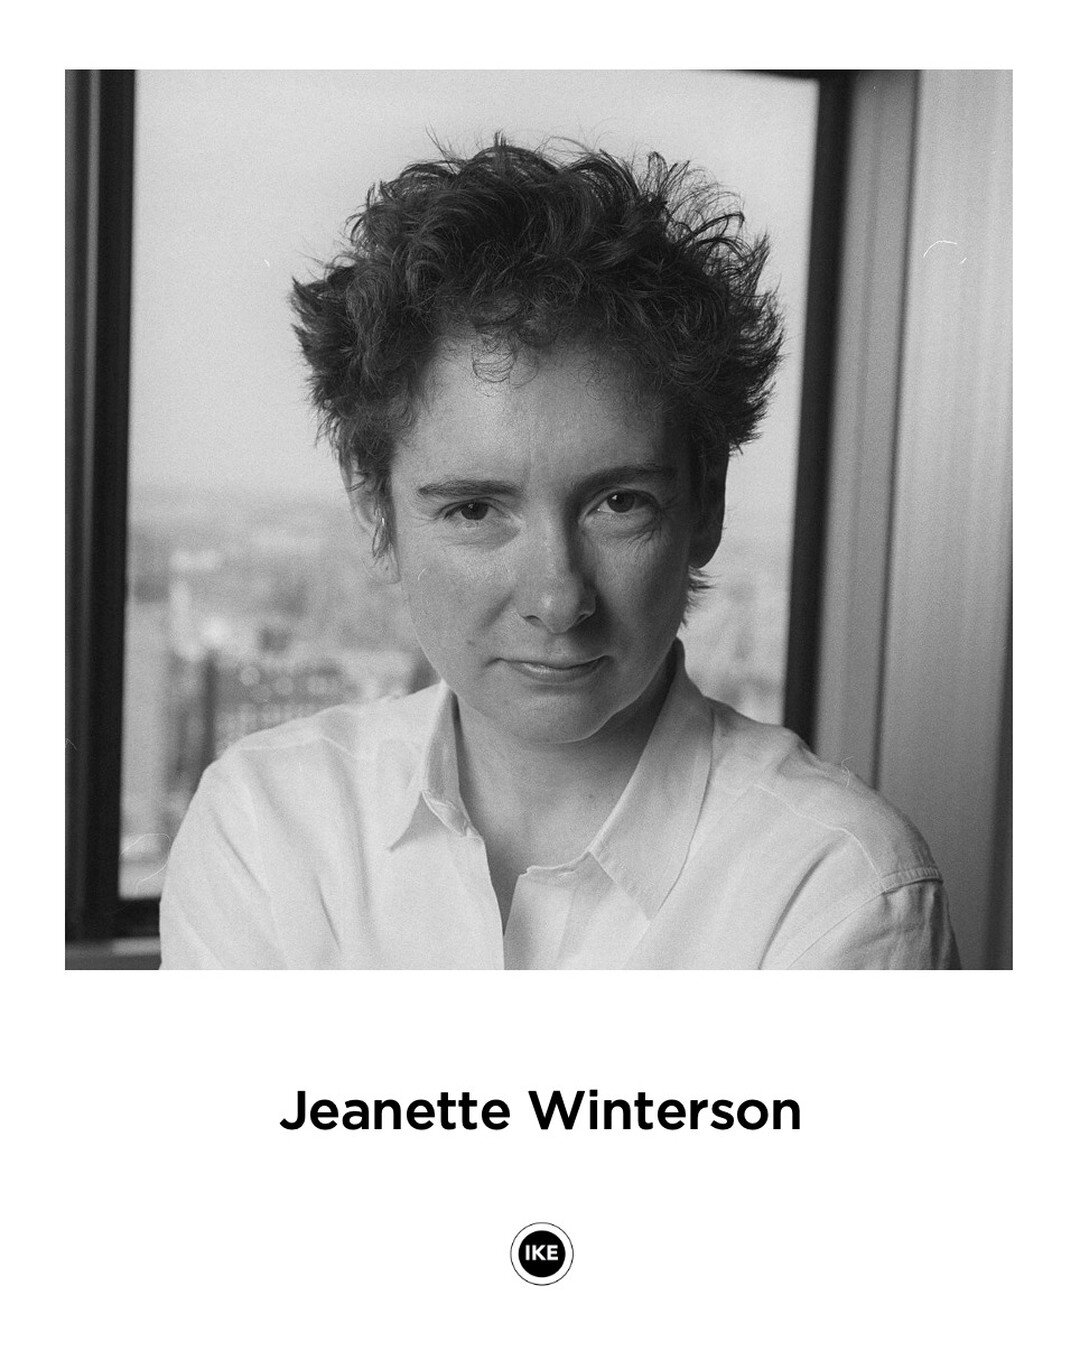 ***
&ldquo;Everything in writing begins with language. Language begins with listening.&rdquo;
&mdash;Jeanette Winterson

Jeanette Winterson is an award-winning English writer, who became famous with her first book, Oranges Are Not the Only Fruit, a s